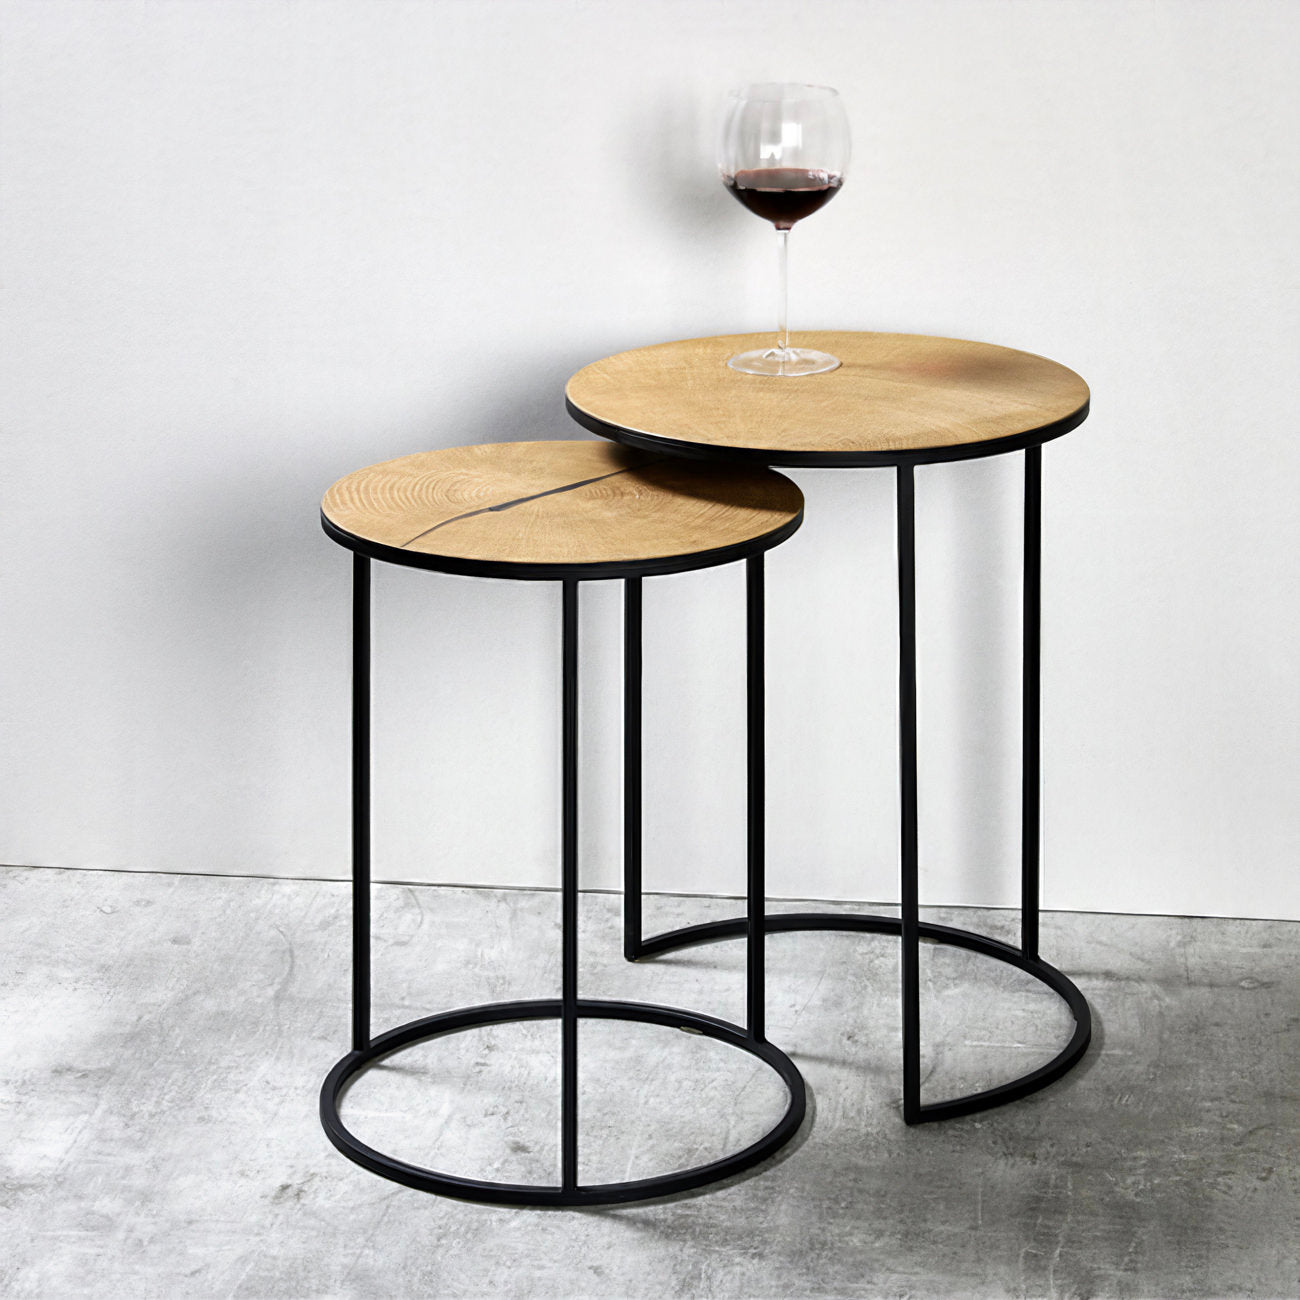 LIAYO side tables by Lambert